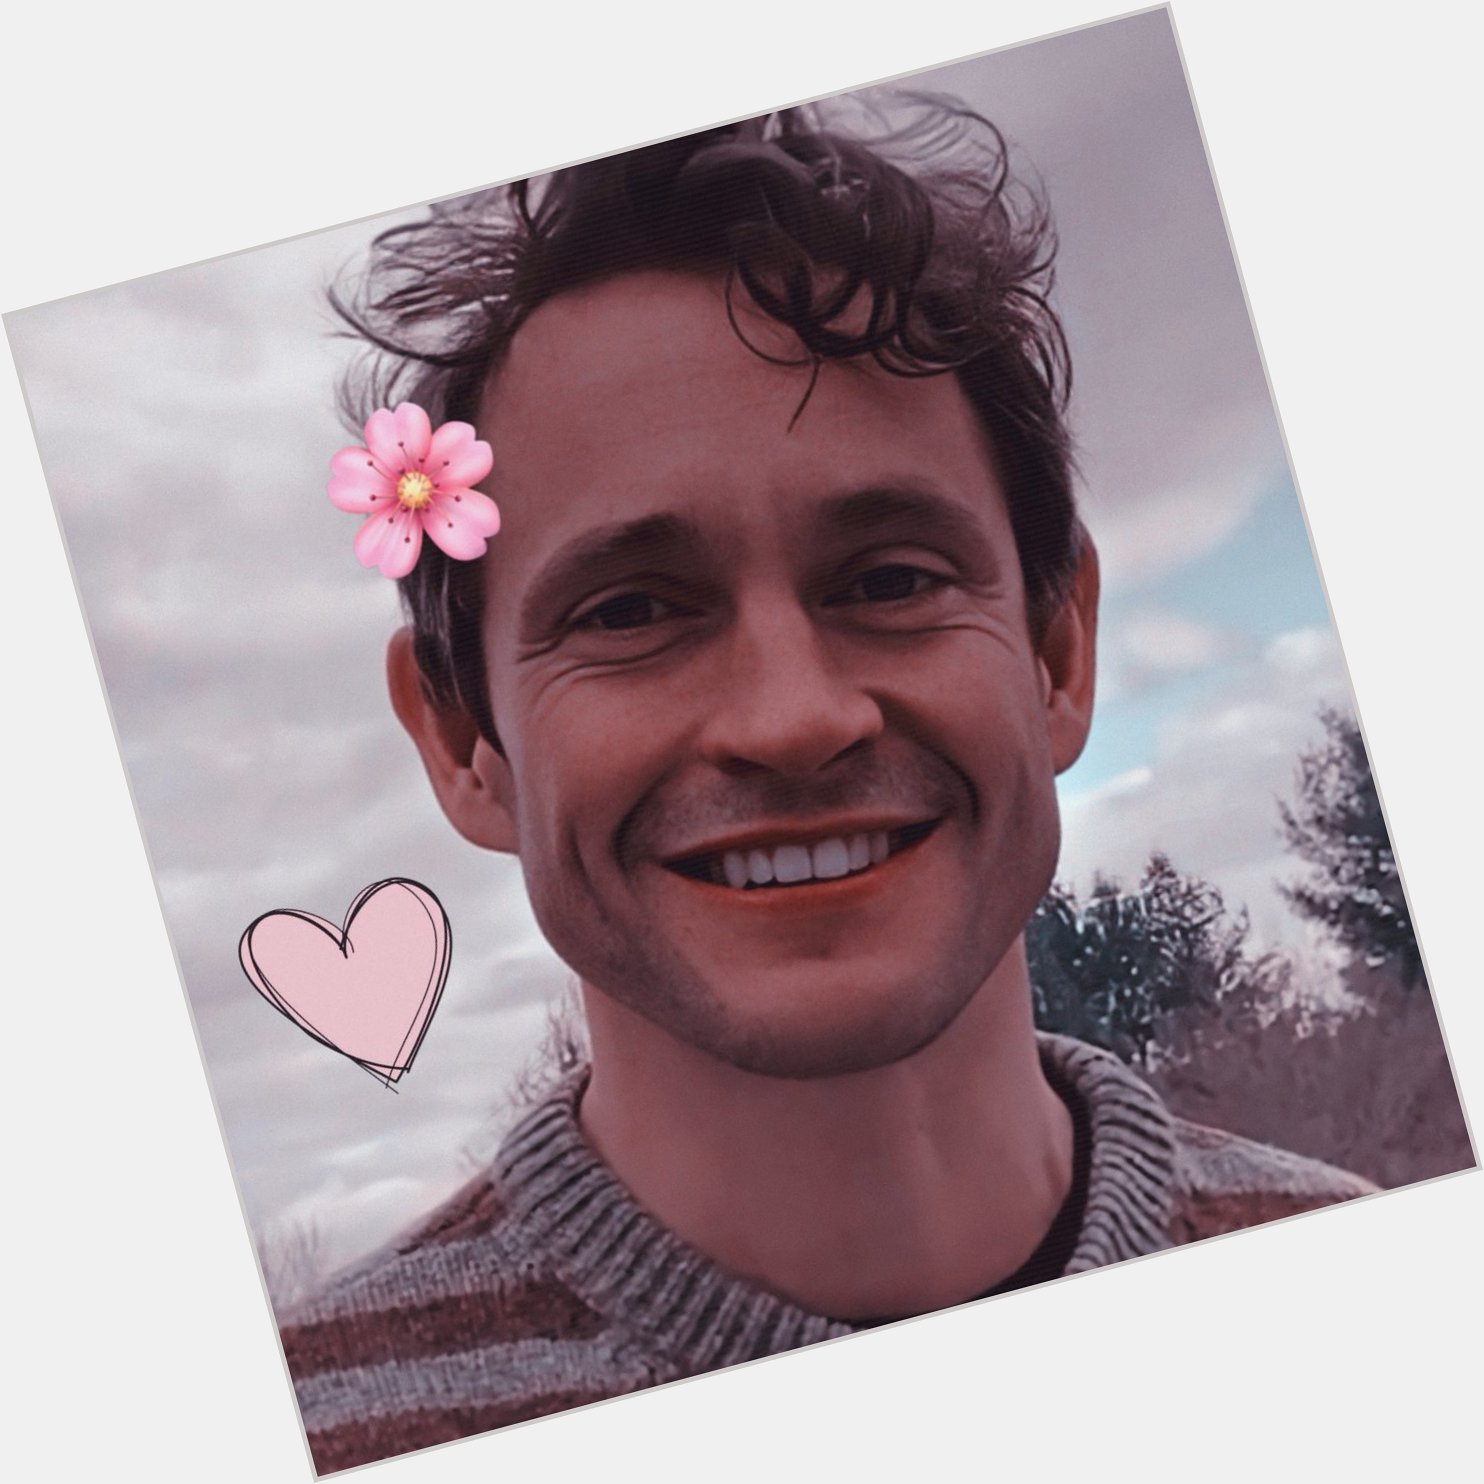 Happy birthday to one the people i love the most in the whole world   my precious angel, Hugh Dancy 